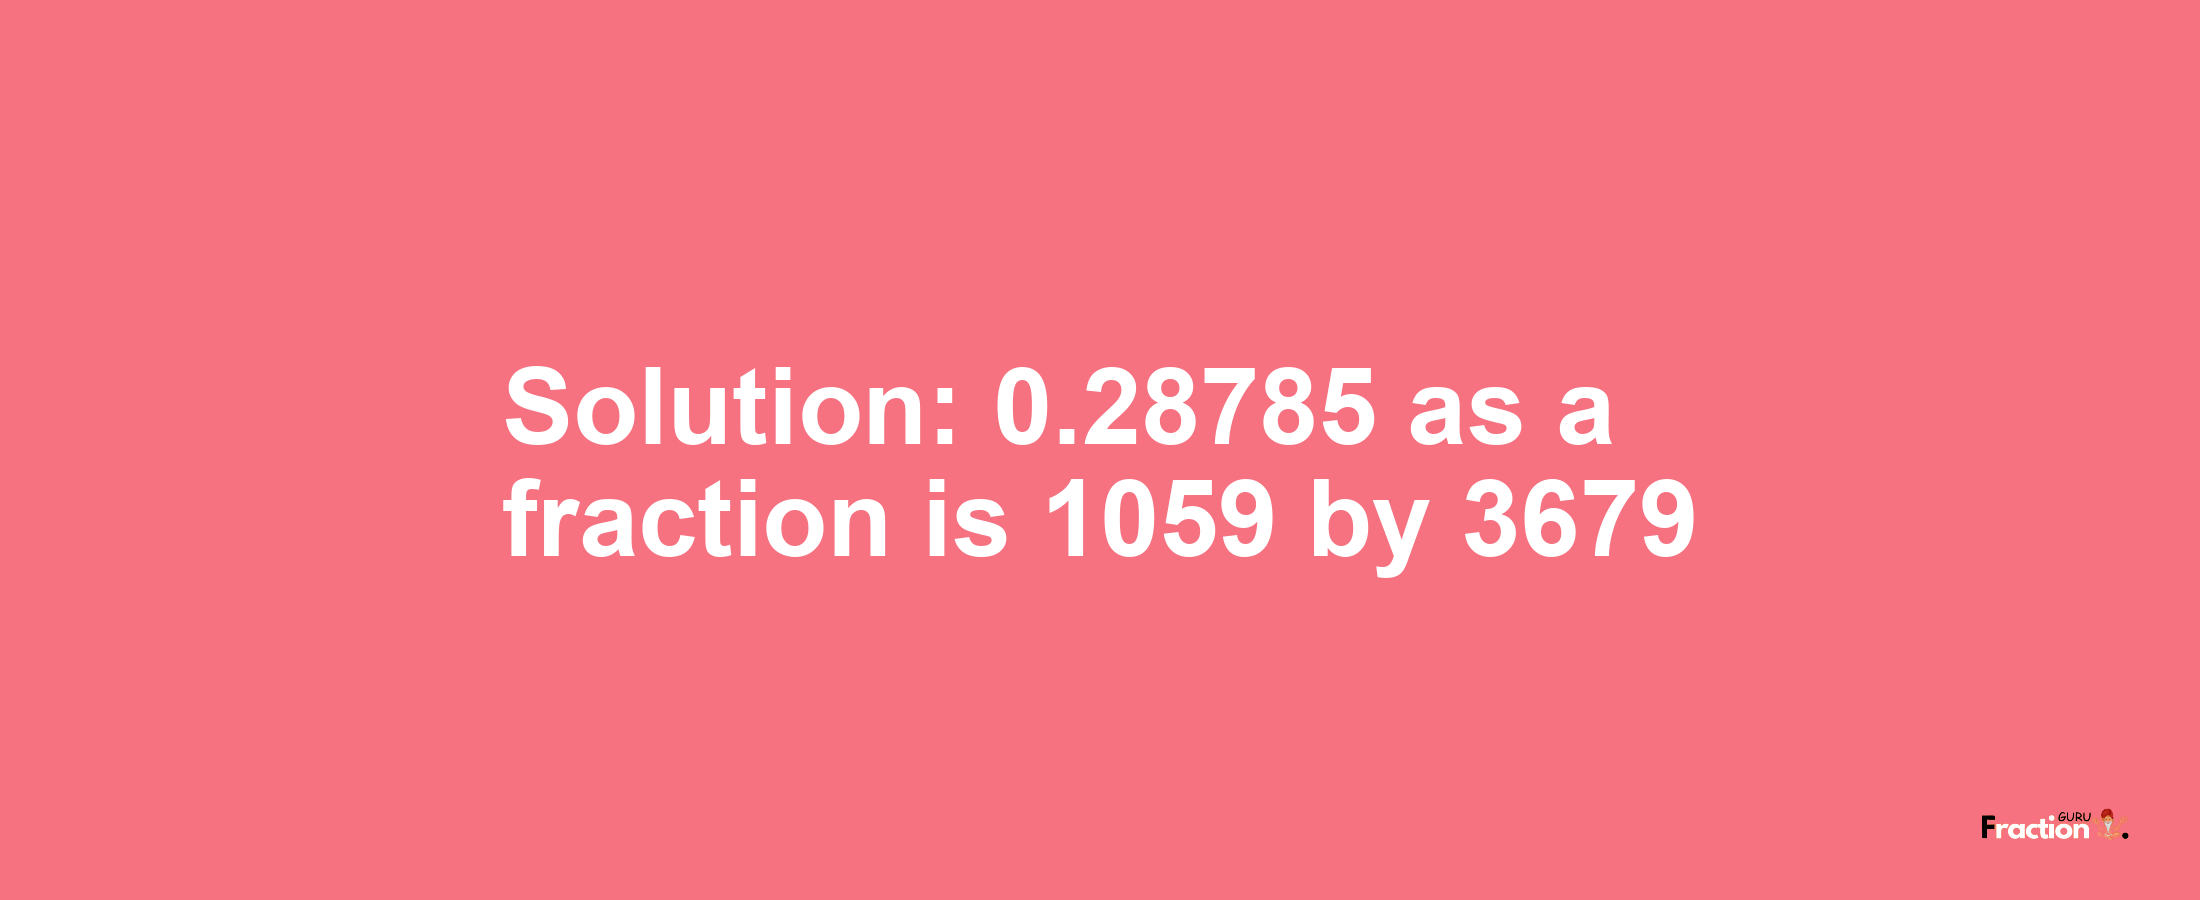 Solution:0.28785 as a fraction is 1059/3679